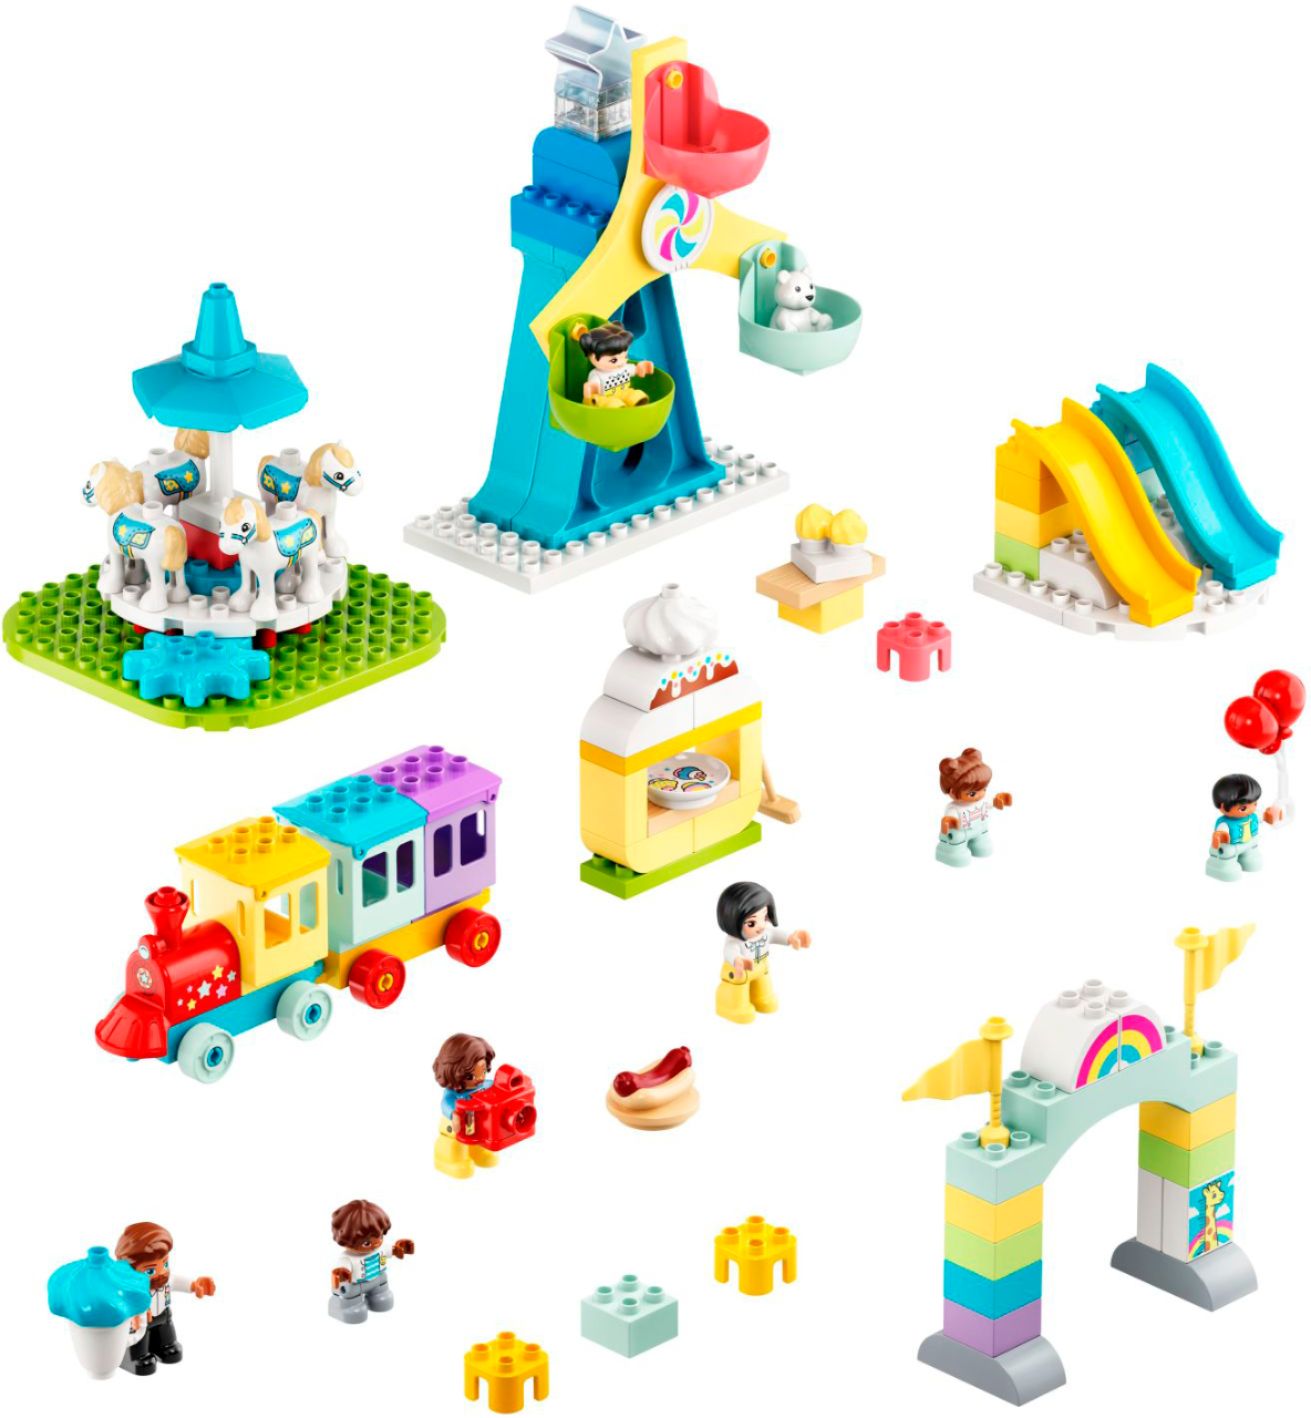 Left View: LEGO DUPLO Town Amusement Park Fairground 10956 Building Set - Featuring 7 Duplo Figures, Trains, Slides, Carousel, and a Ferris Wheel, Educational Learning Toy and Playset for Toddlers Ages 2+